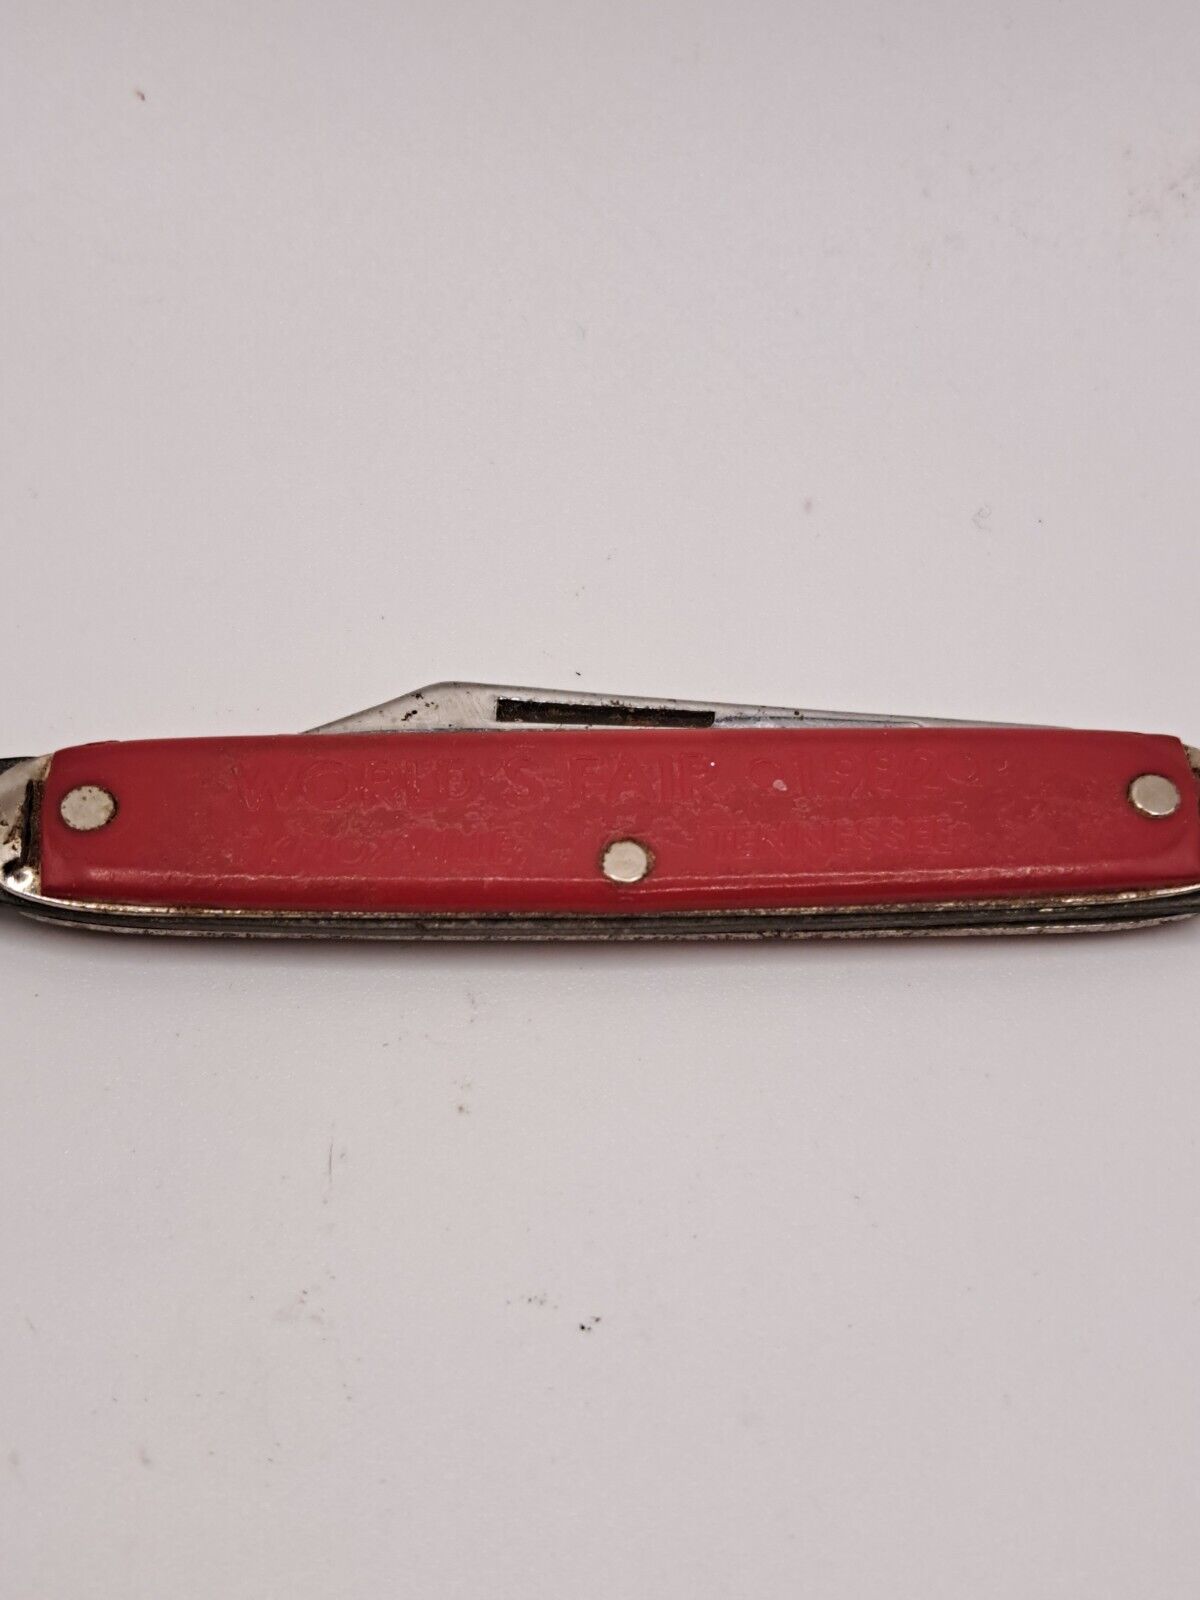 Vintage 1982 Worlds Fair Knoxville Tennessee RedPocket Knife Made in USA